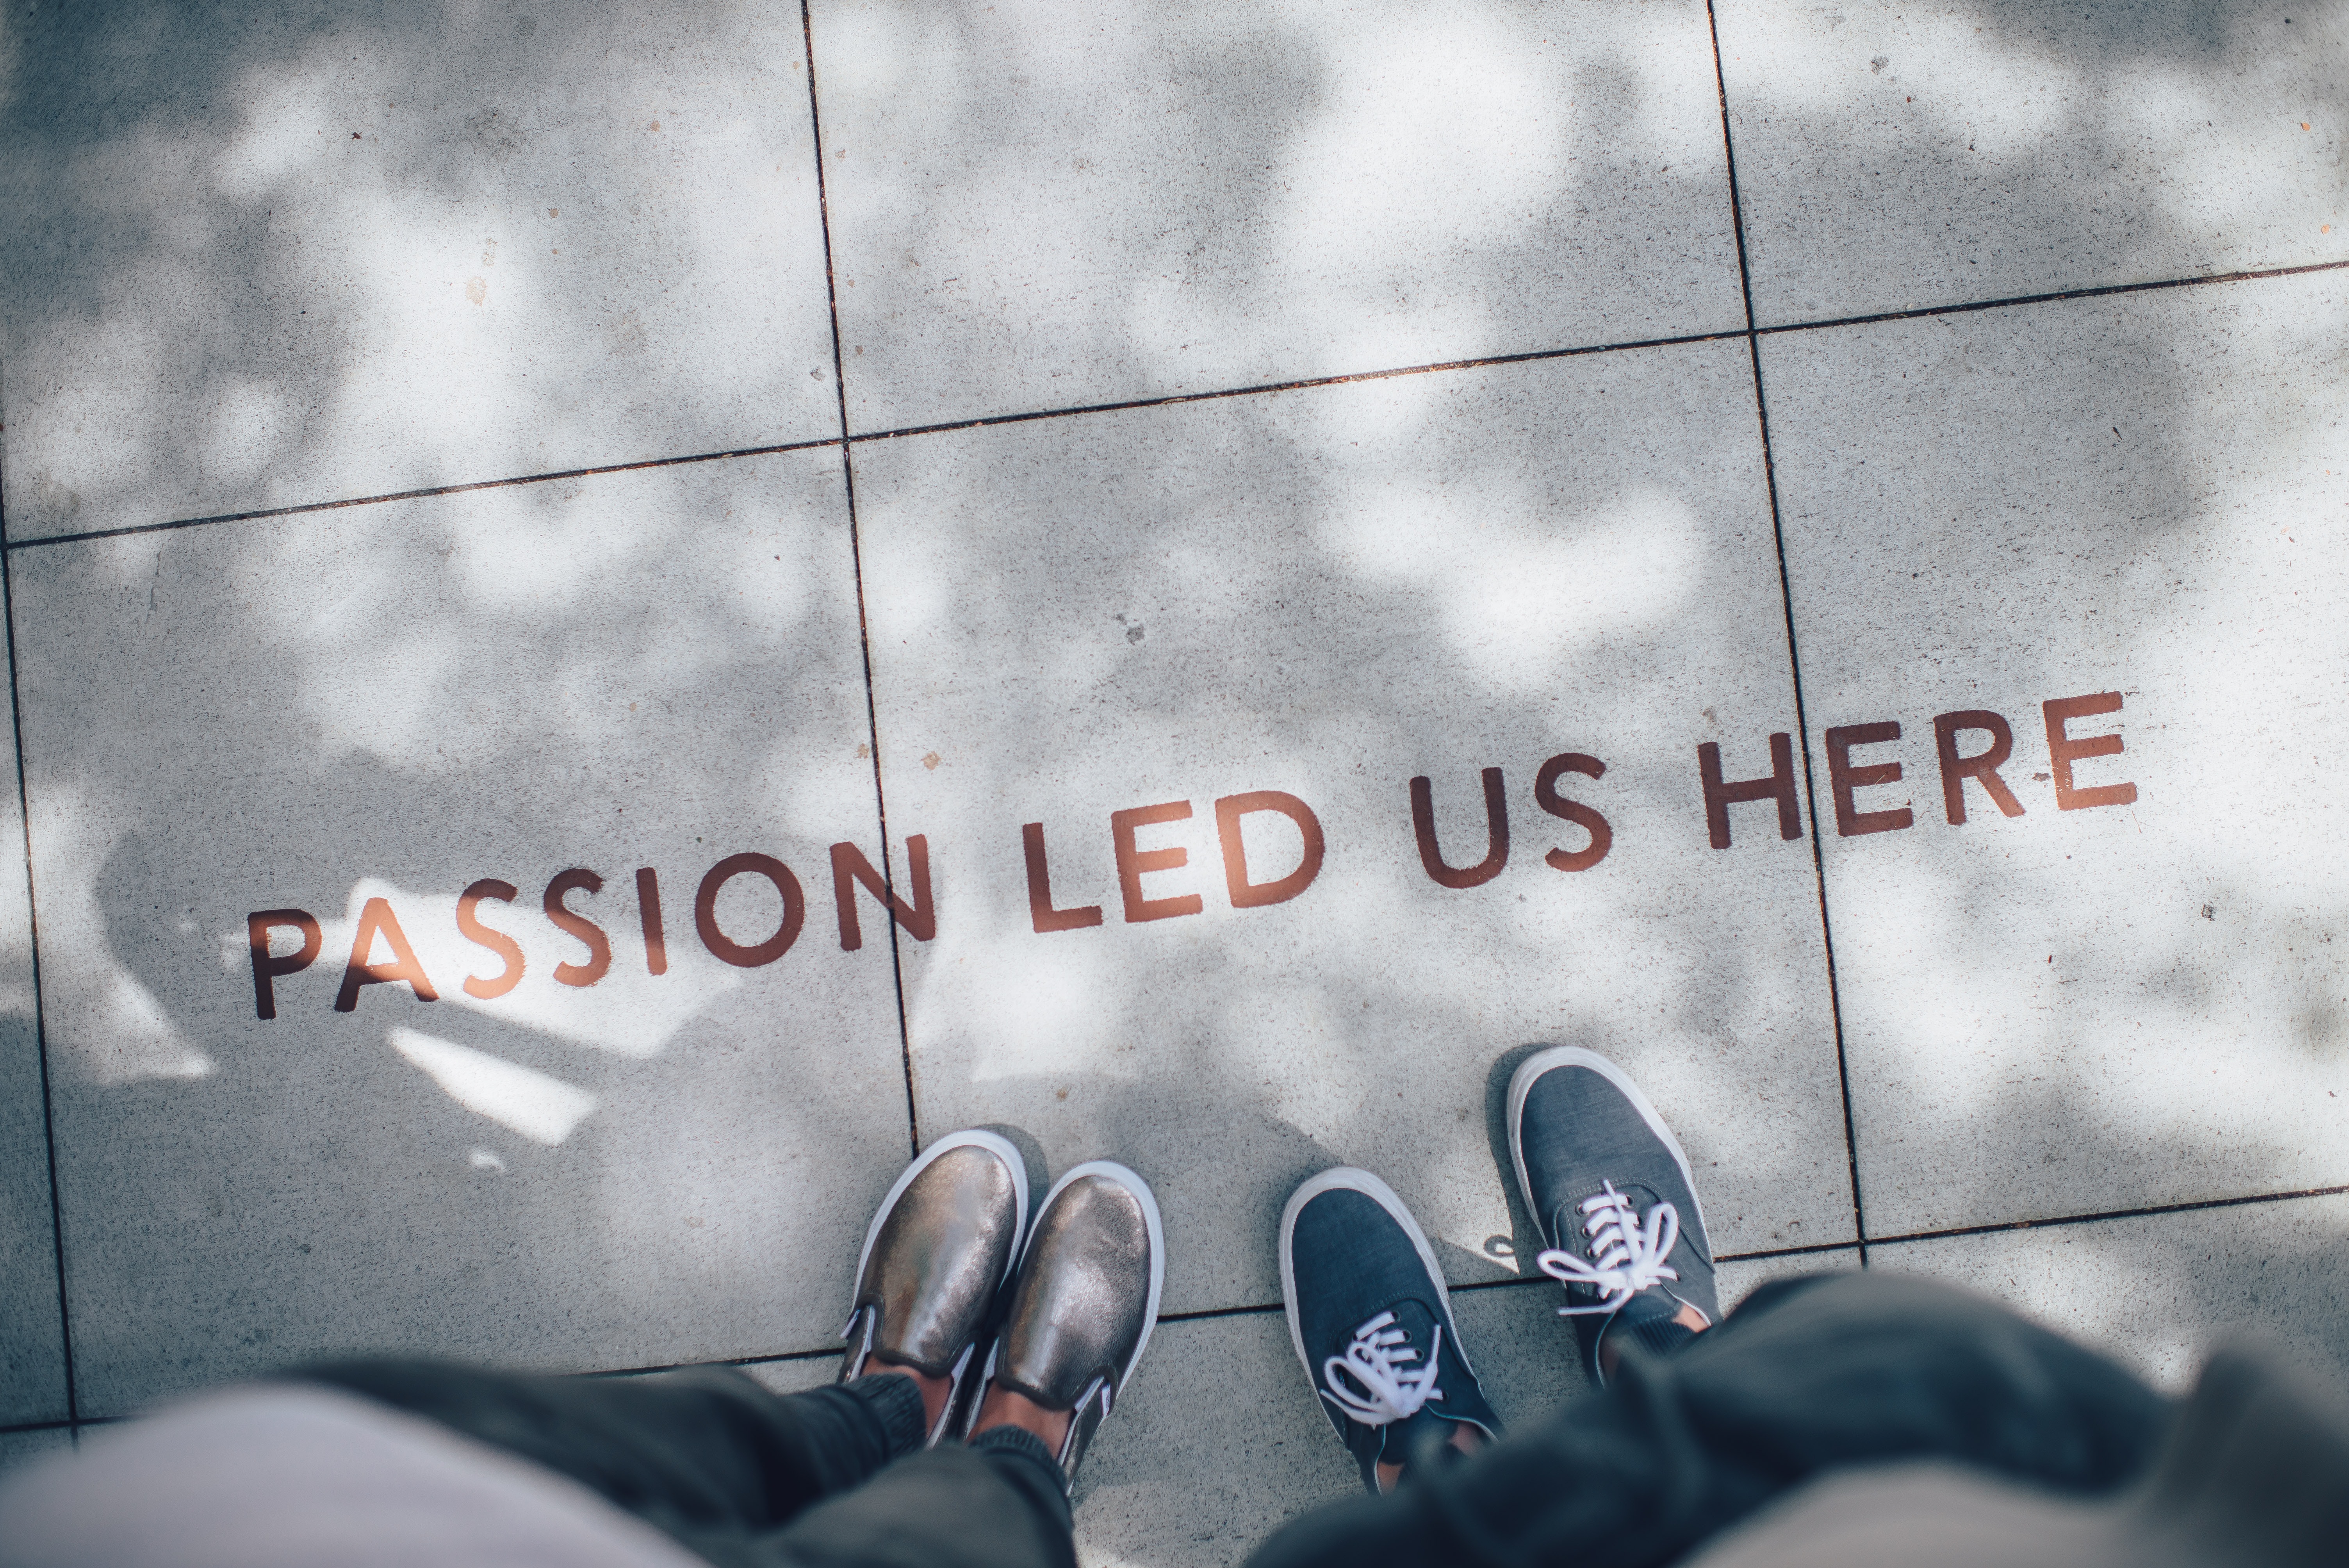 "Passion led us here" printed on ground